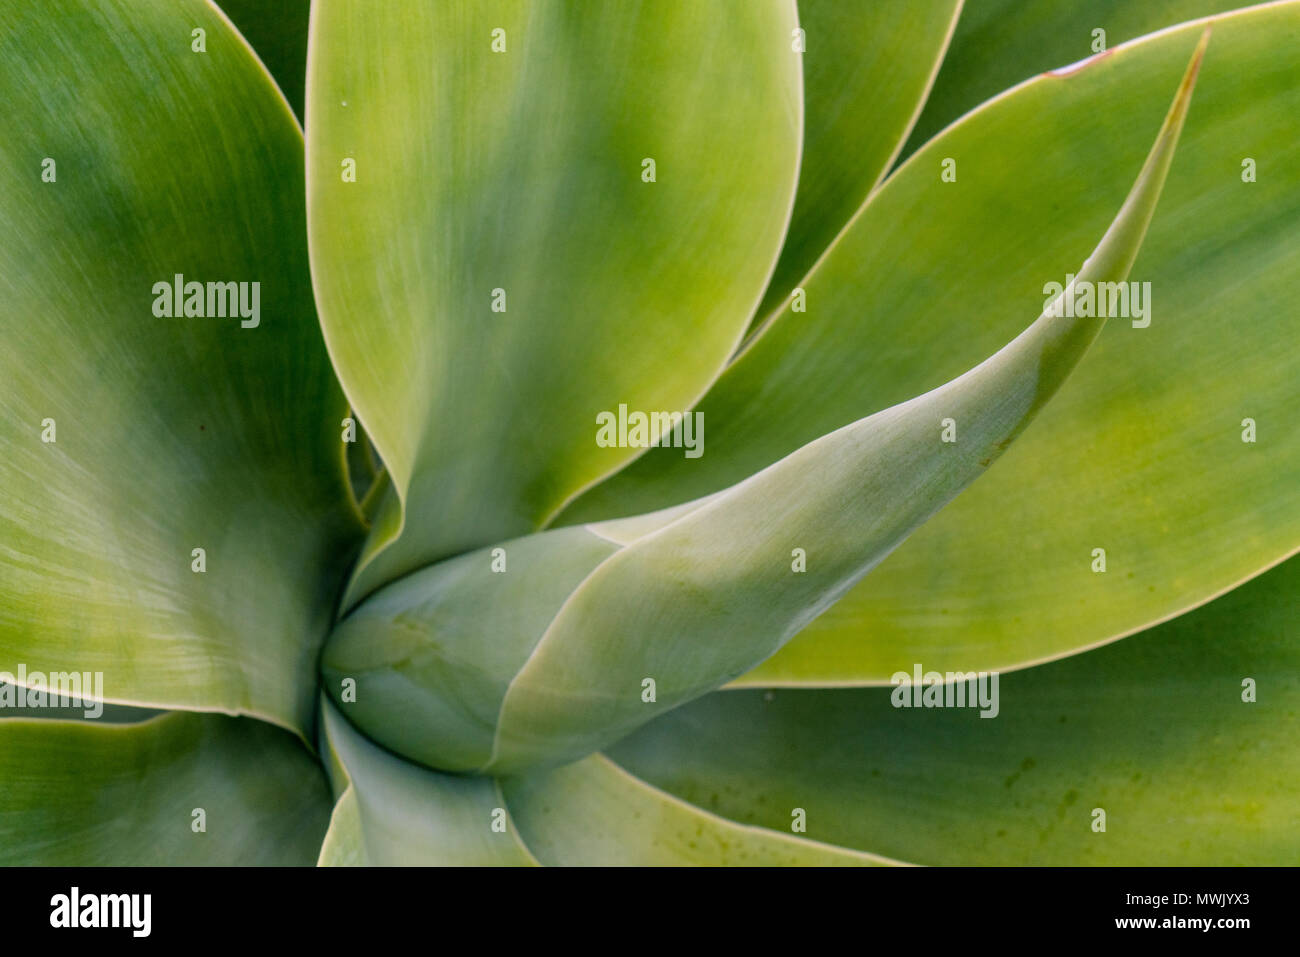 Images of succulents and different flowering plants found on Balboa Island, CA. Stock Photo